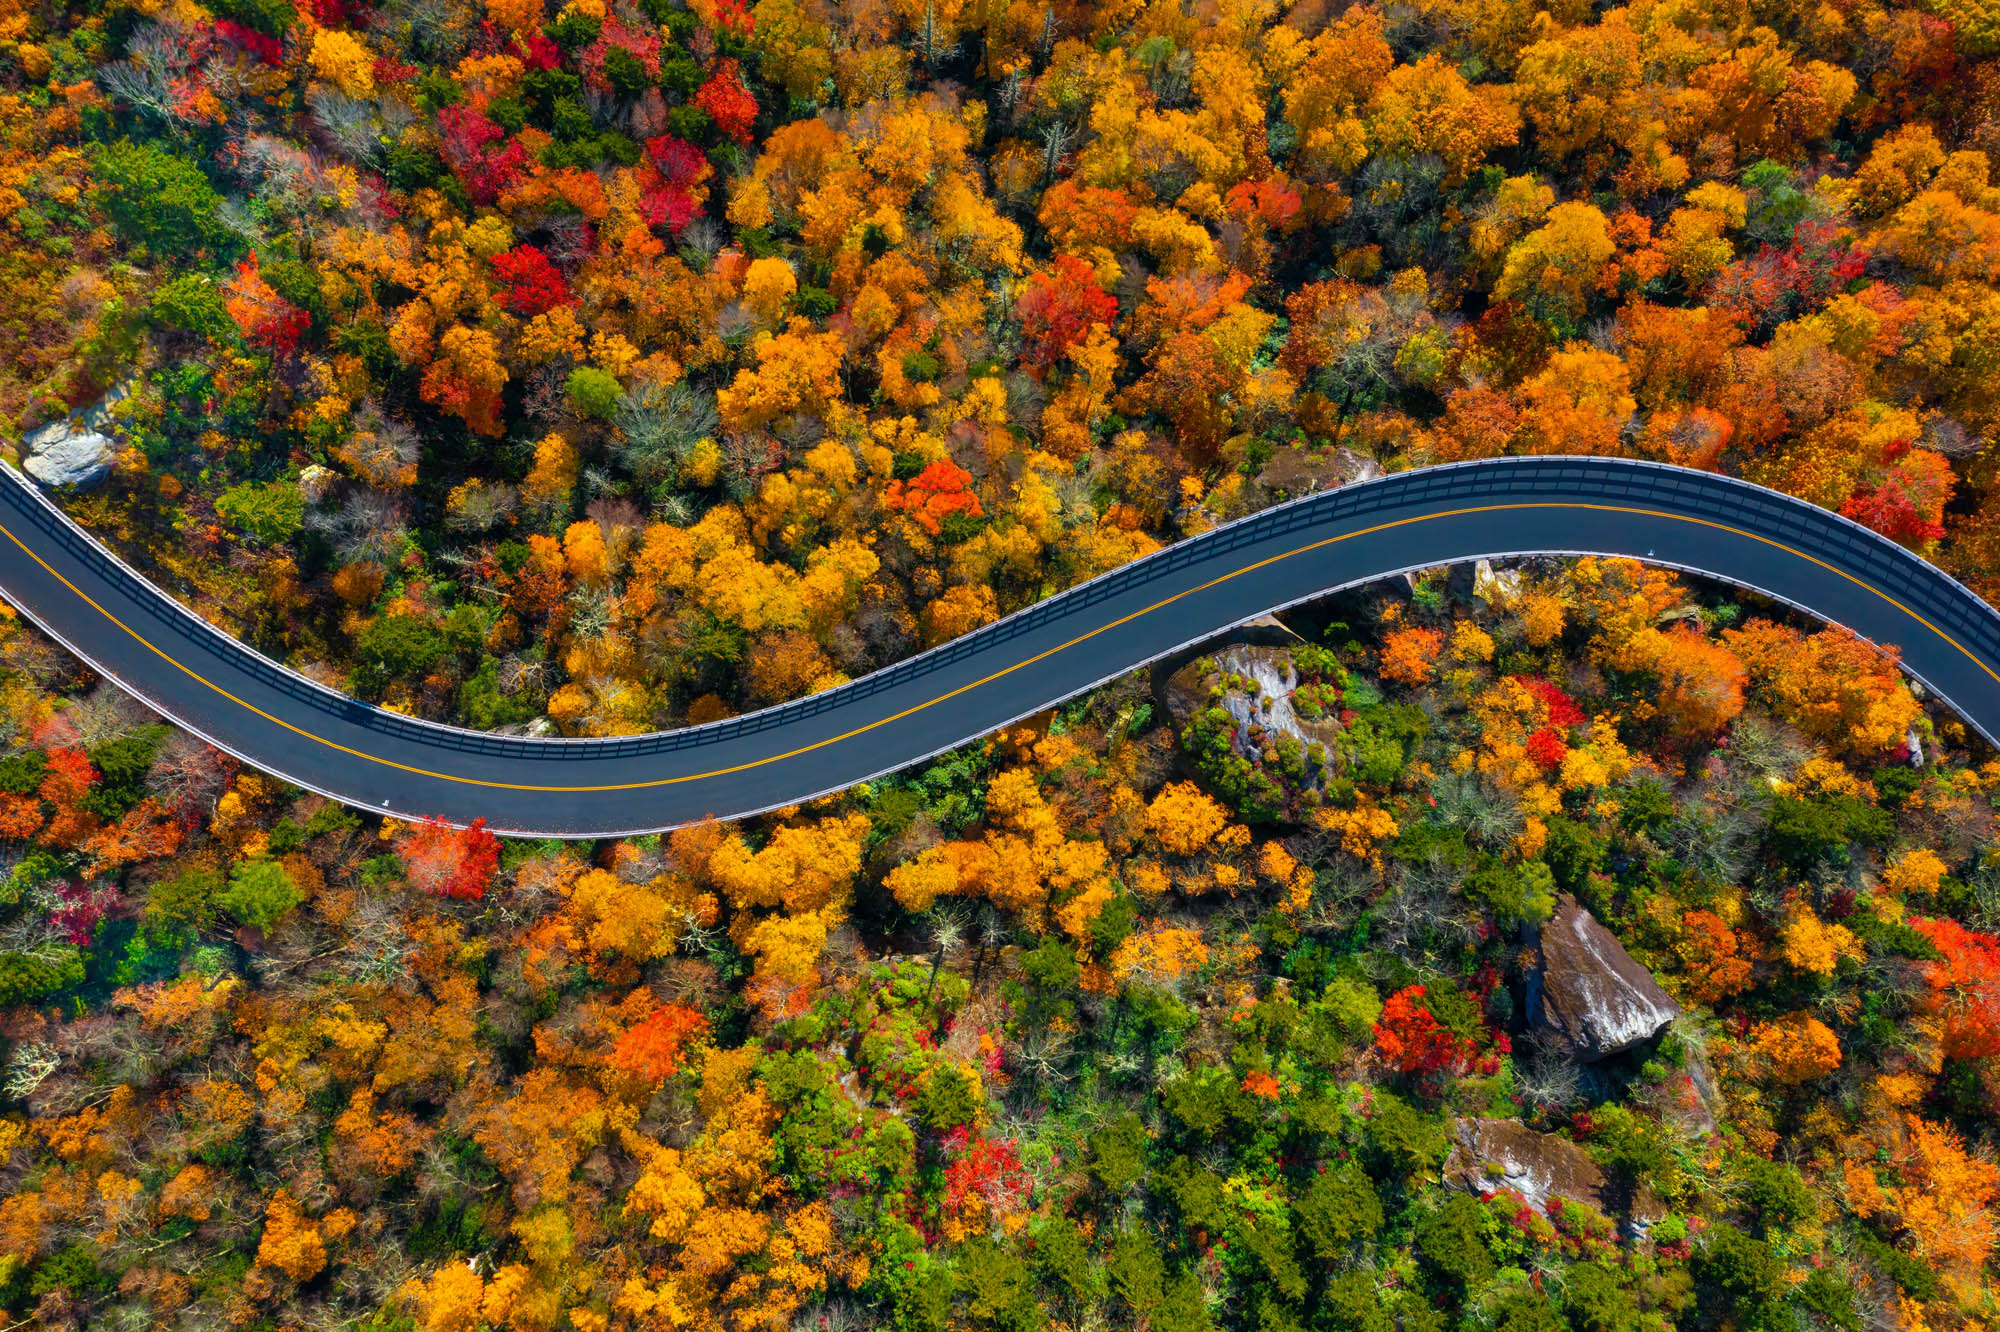 Blue Ridge Parkway, most scenic drives in america